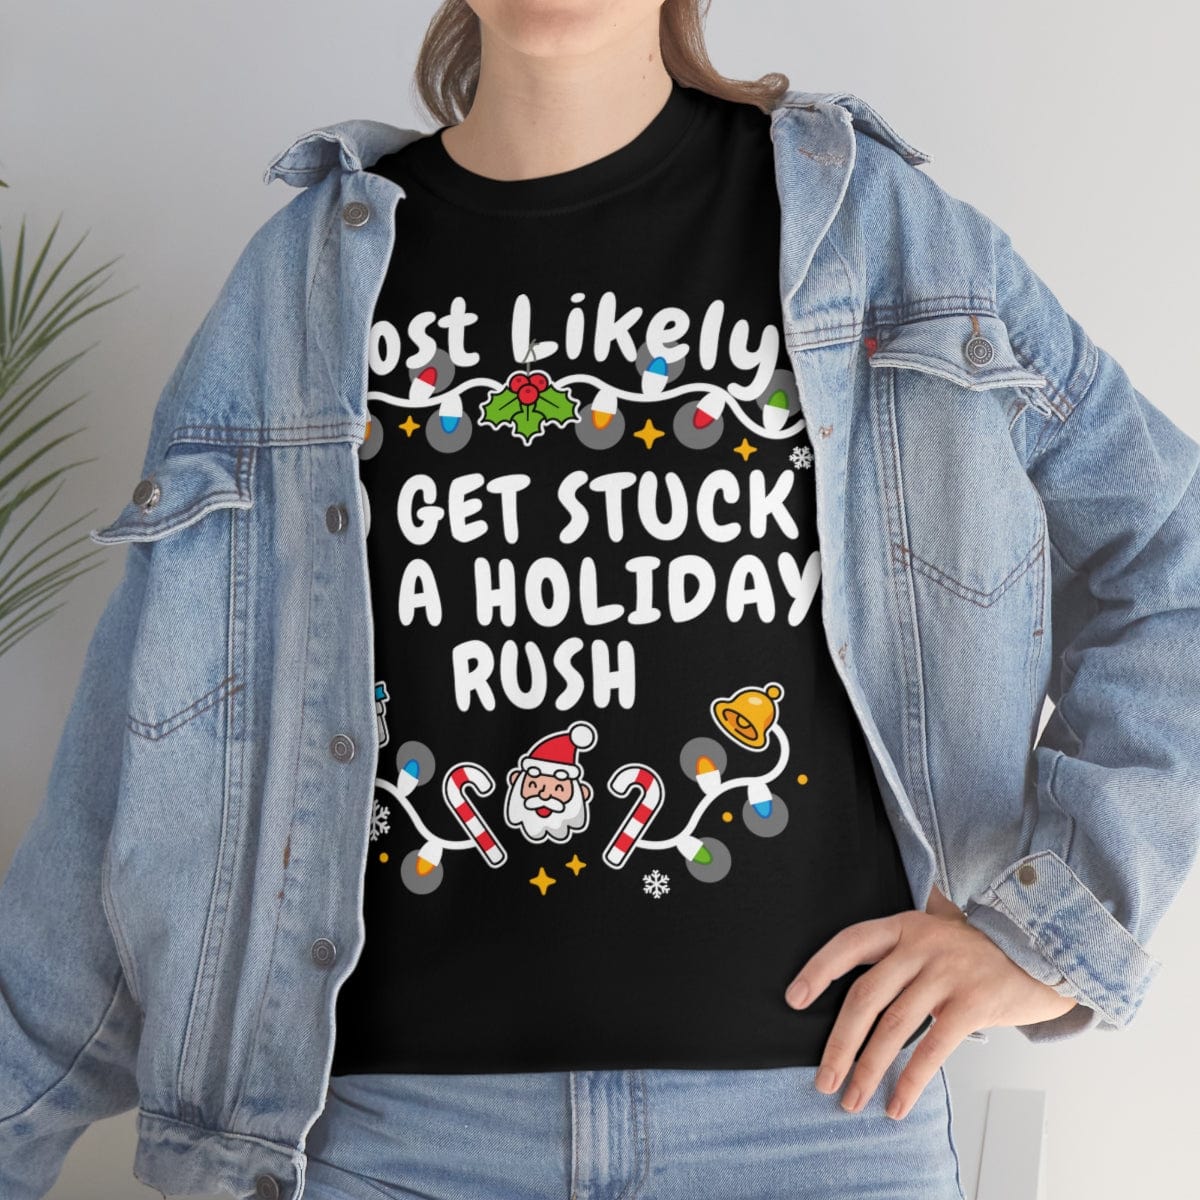 TO GET STUCK IN A HOLIDAY RUSH